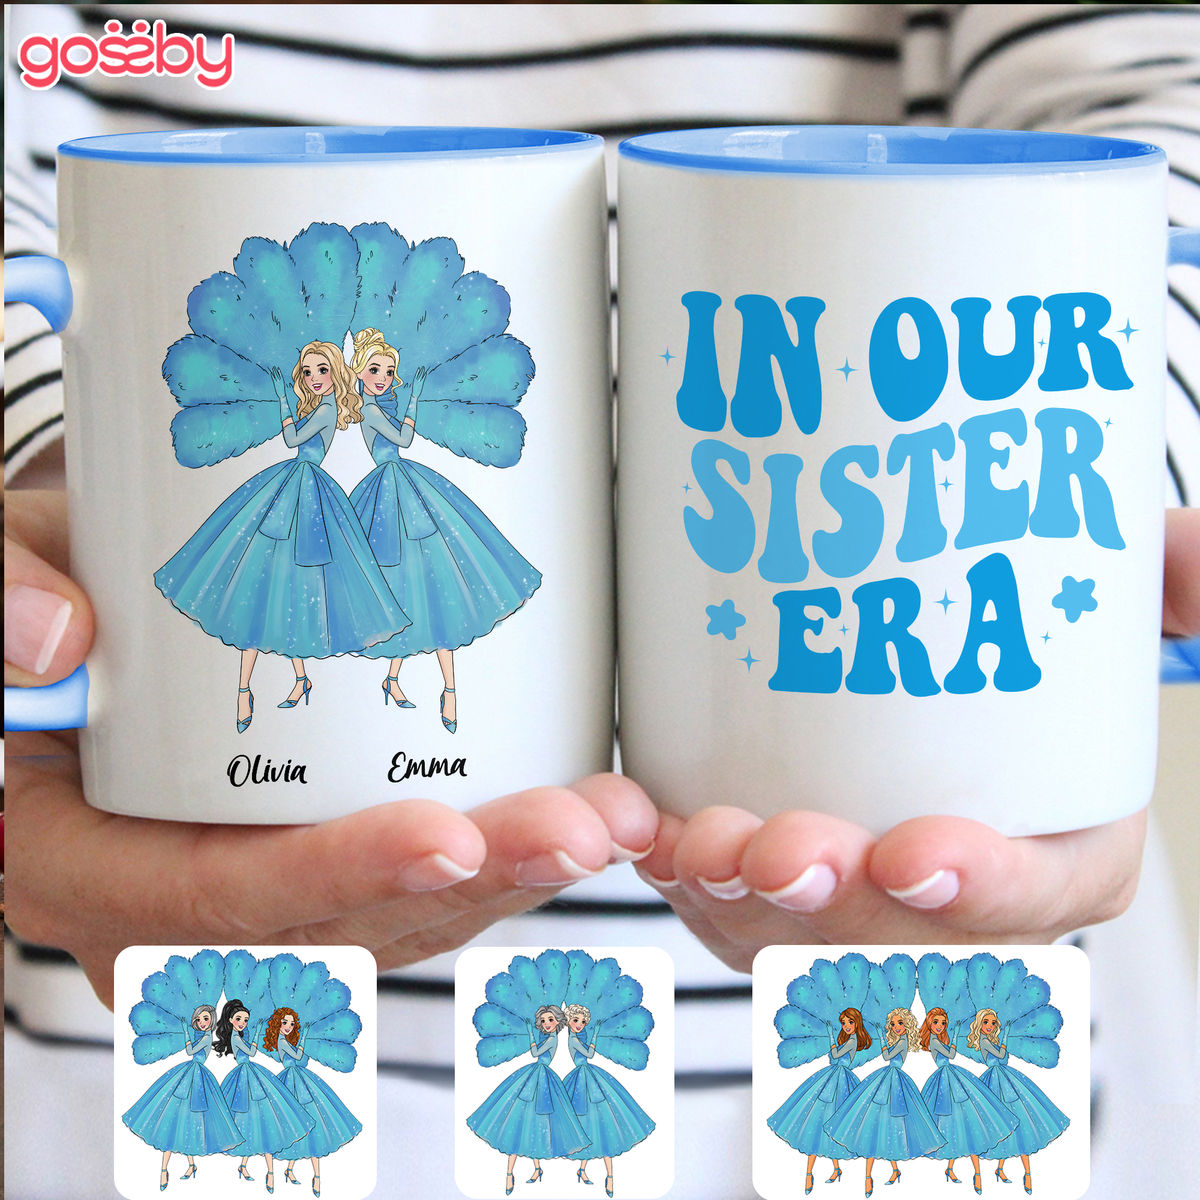 Personalized Mug - Personalized Mug For Sisters - Sisters Sisters - White Christmas - In our sister era_2